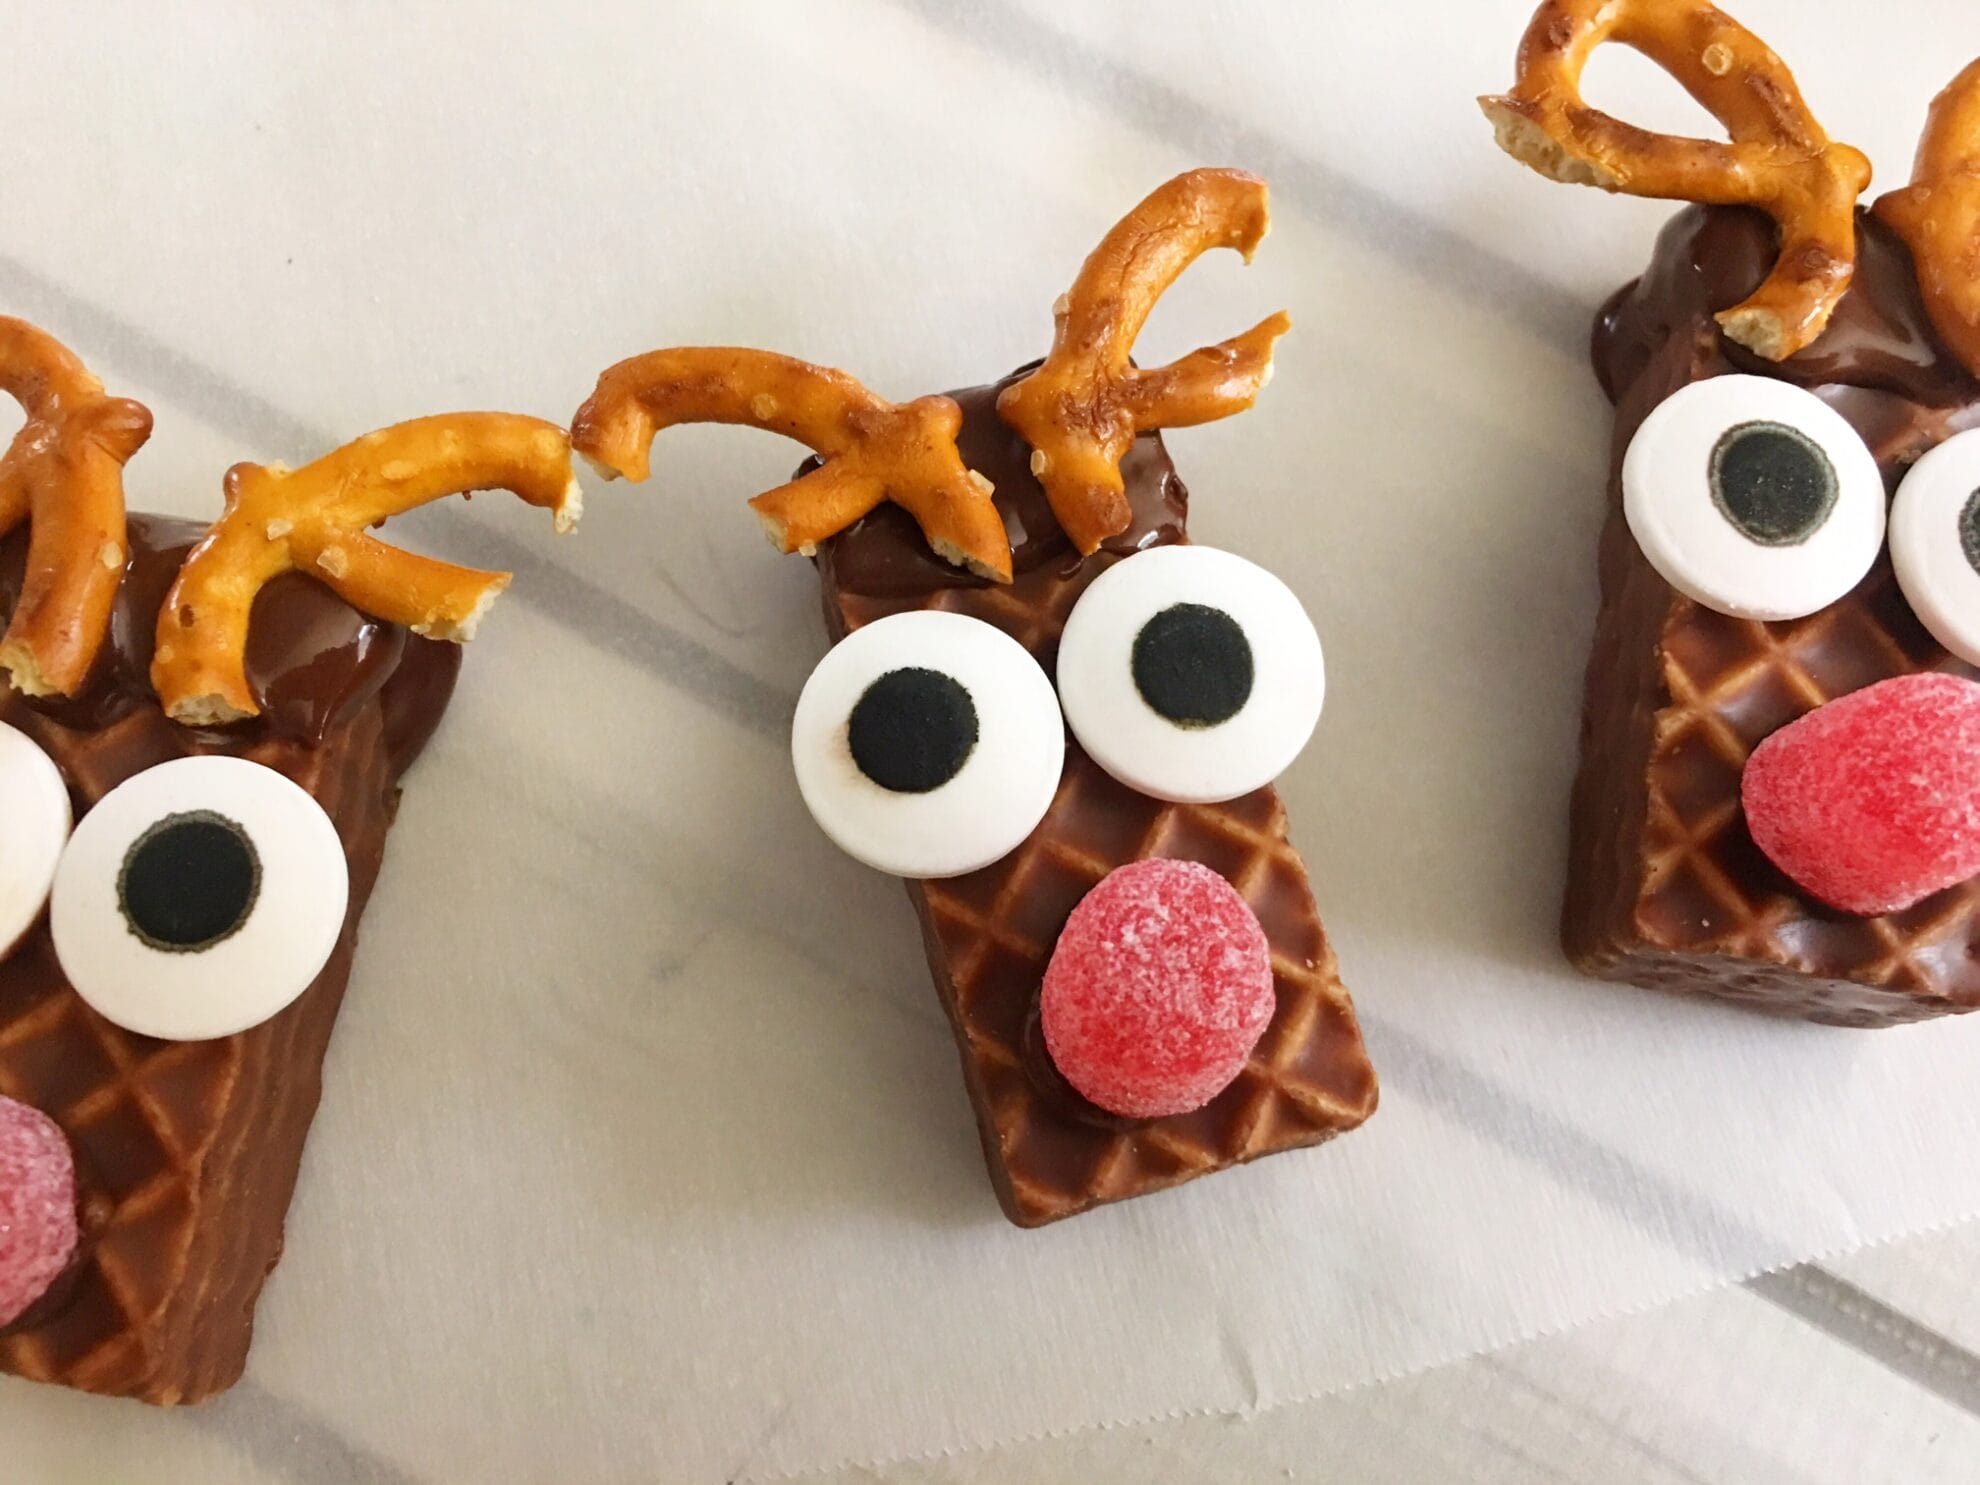 This cute Christmas treat takes a few simple ingredients and turns a store bought snack into Rudolph. These Rudolph Nutty Bars will make everyone smile